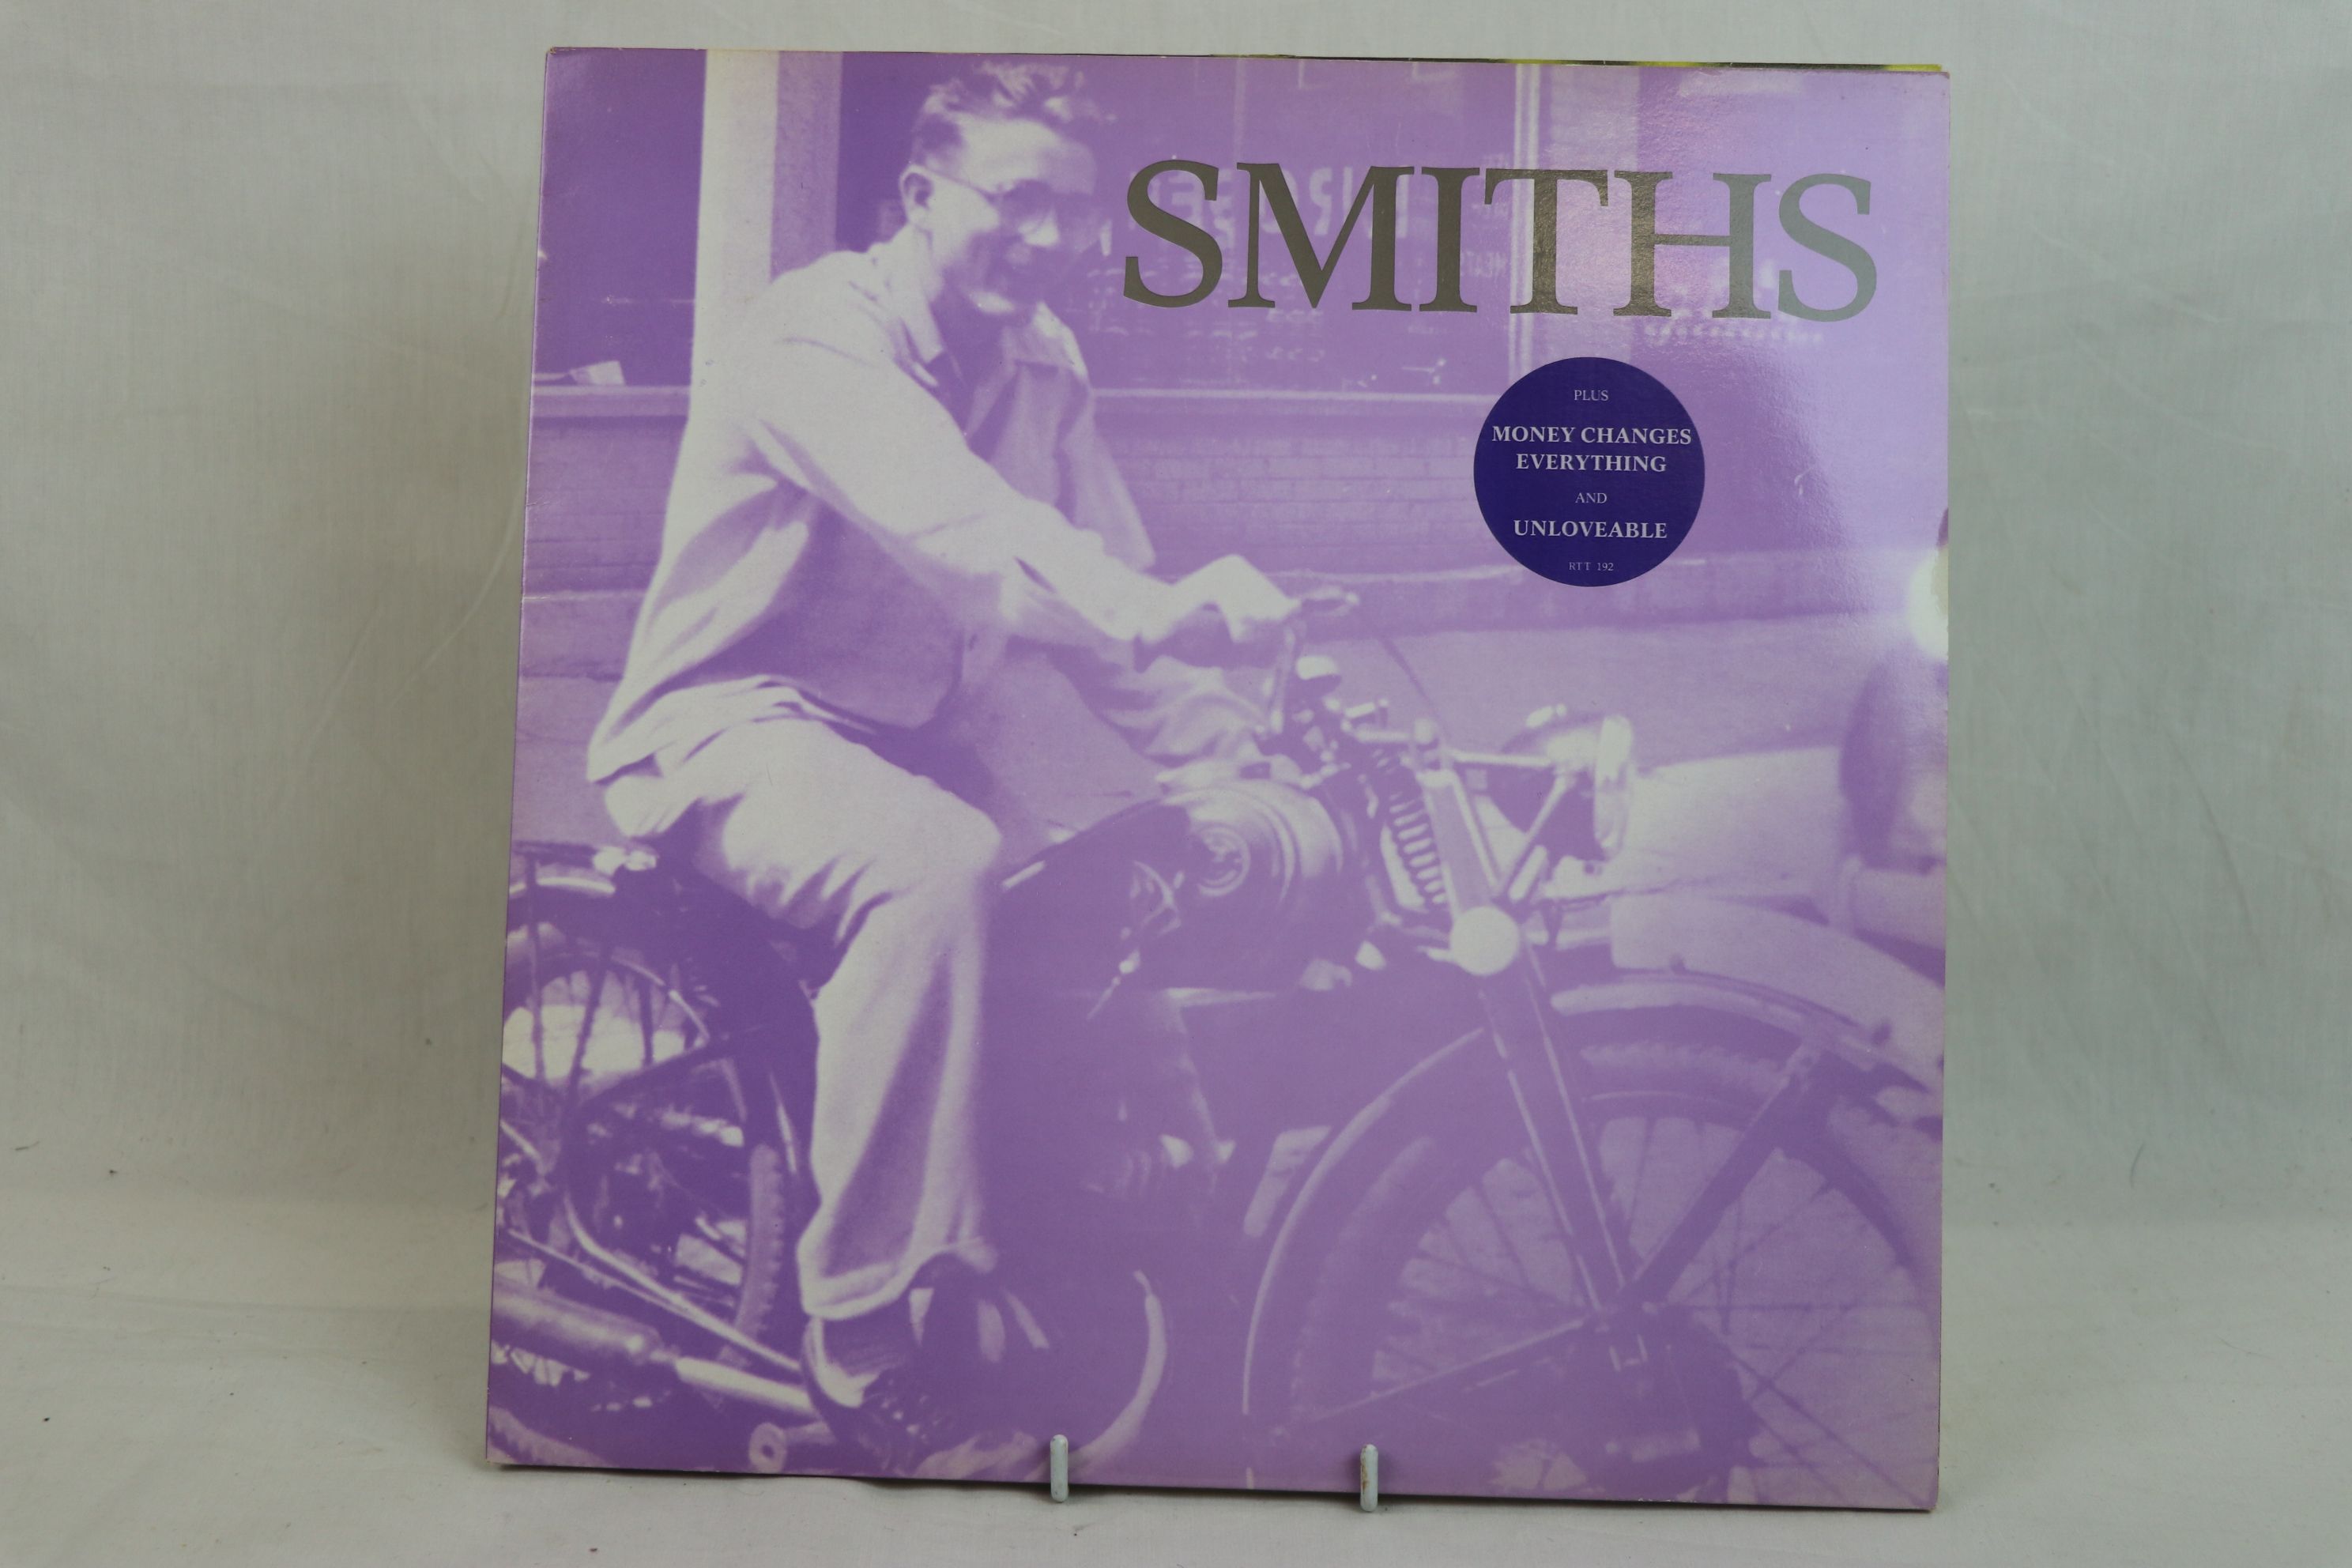 Vinyl - Collection of 7 x The Smiths vinyl 12" singles to include This Charming Man (Rough Trade - Image 6 of 9